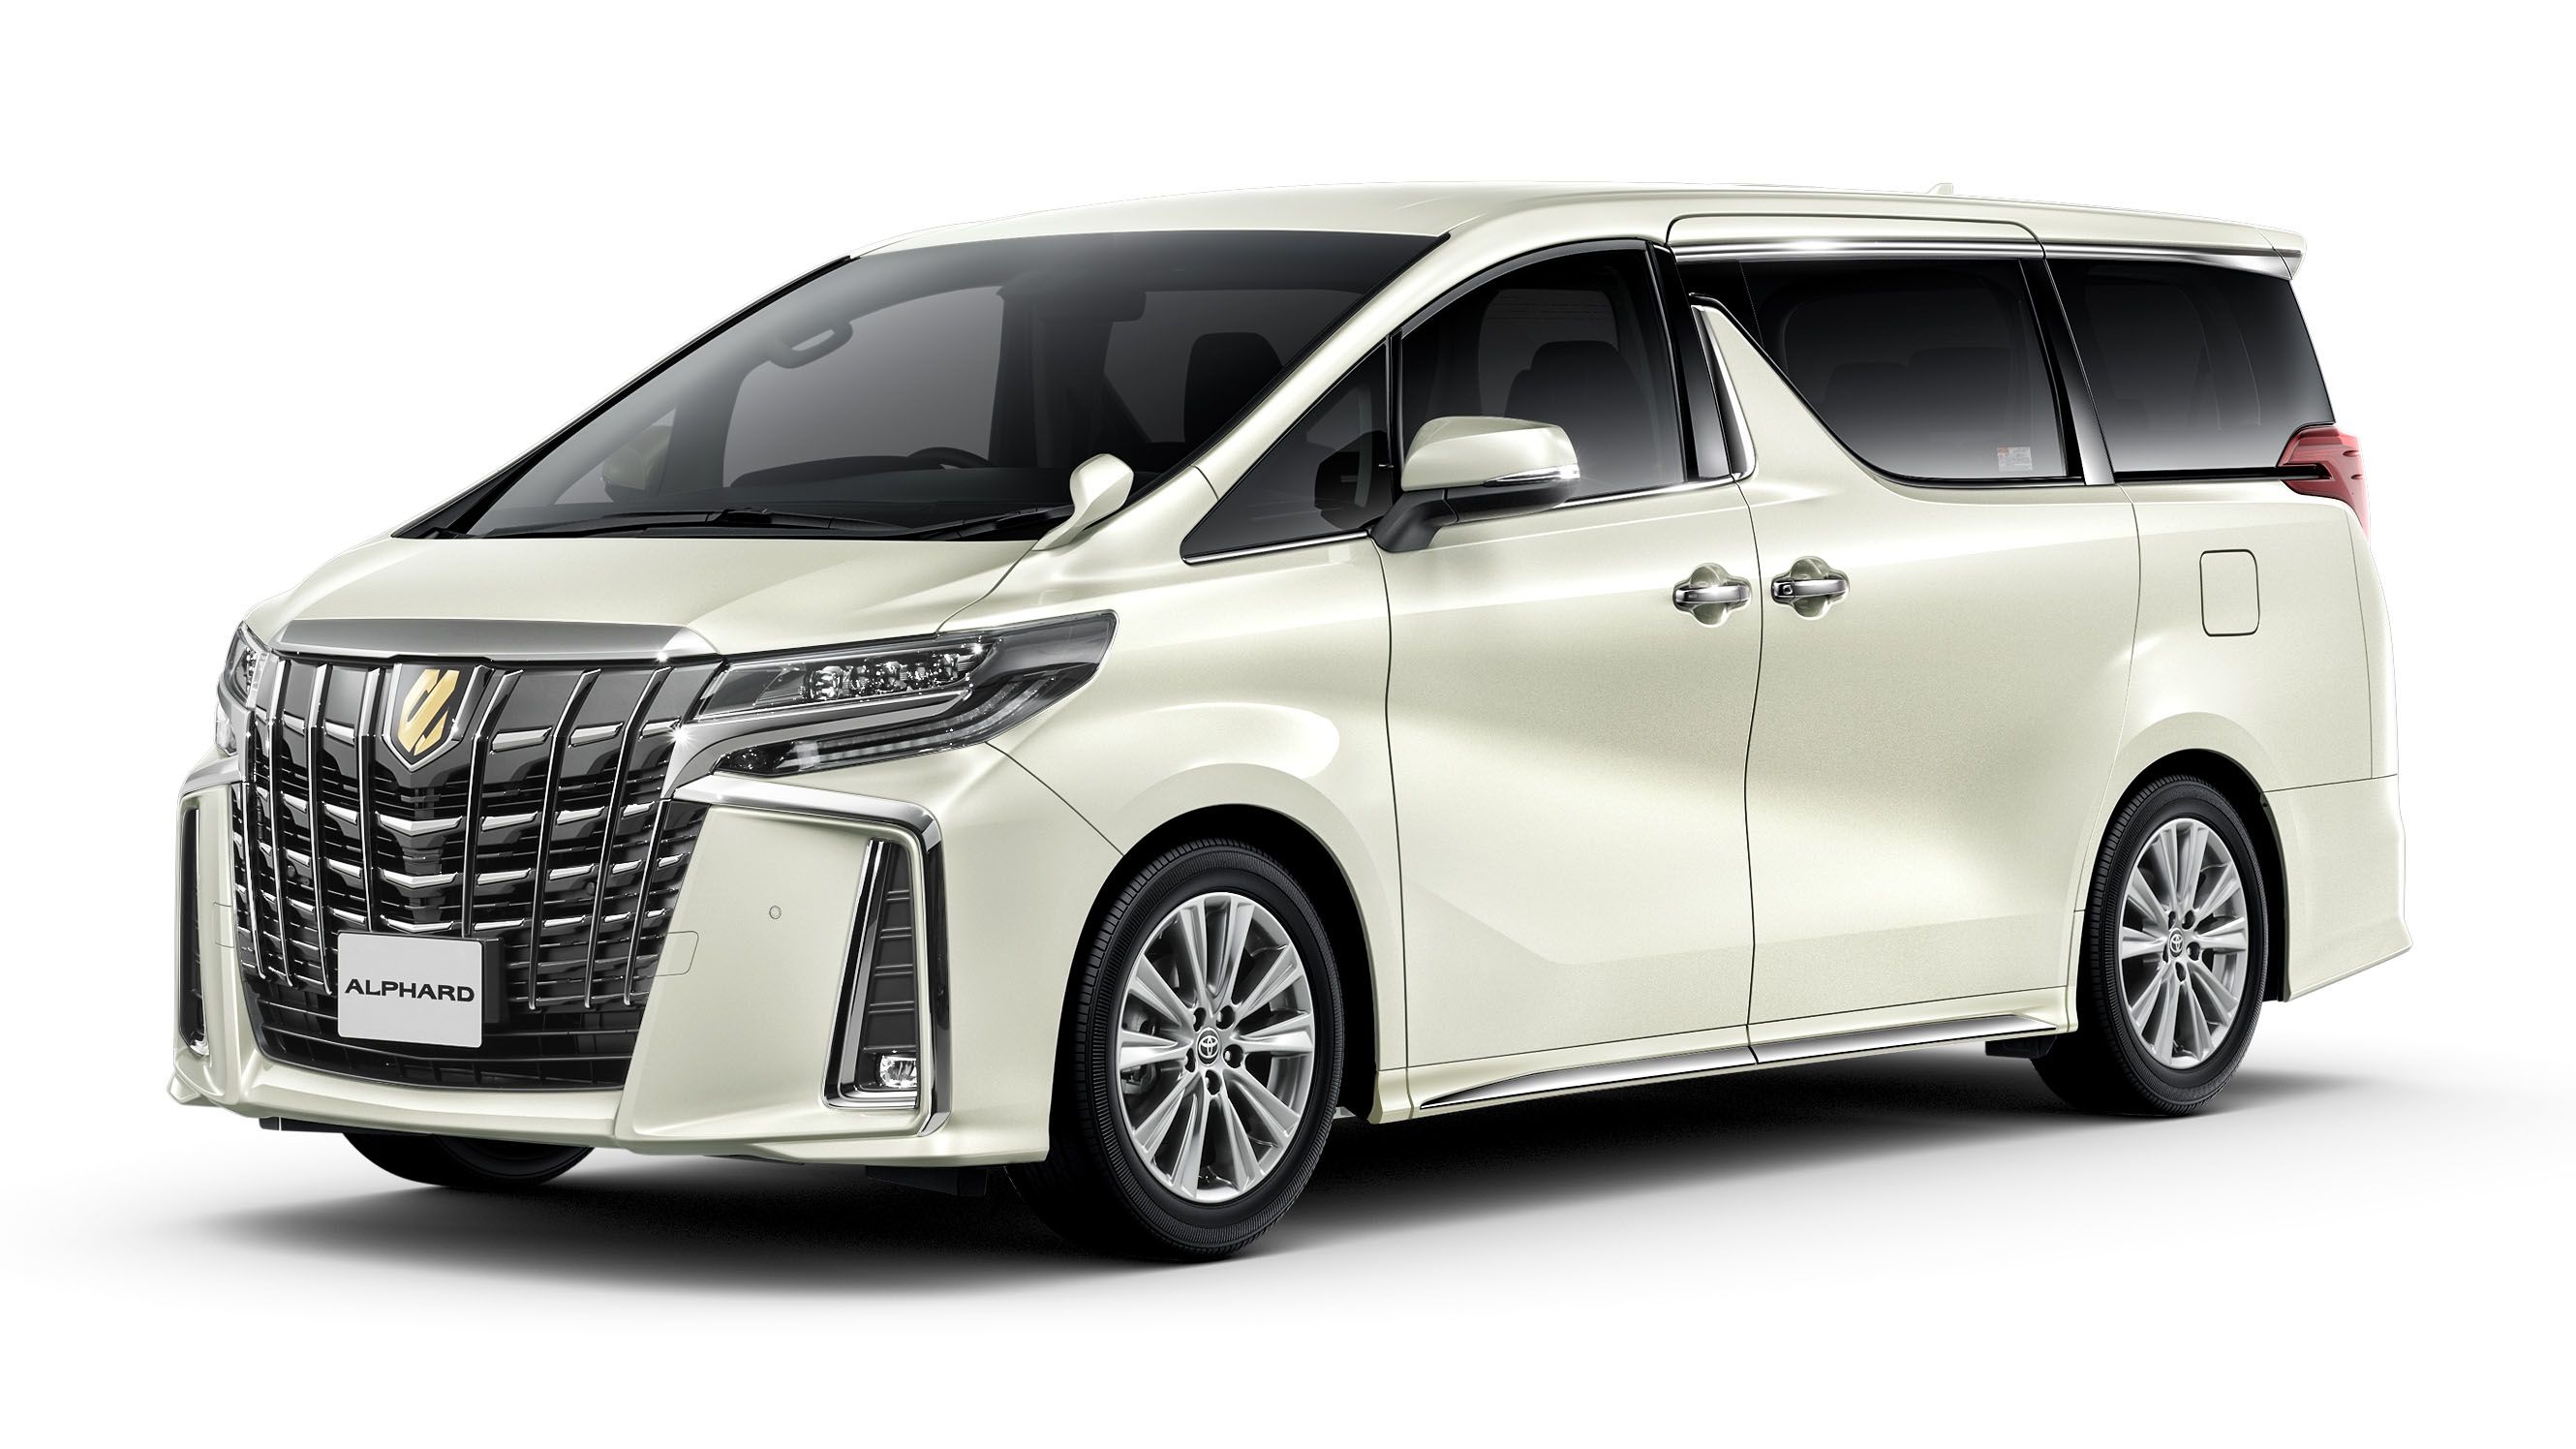 2021 Toyota Sienna people mover goes 